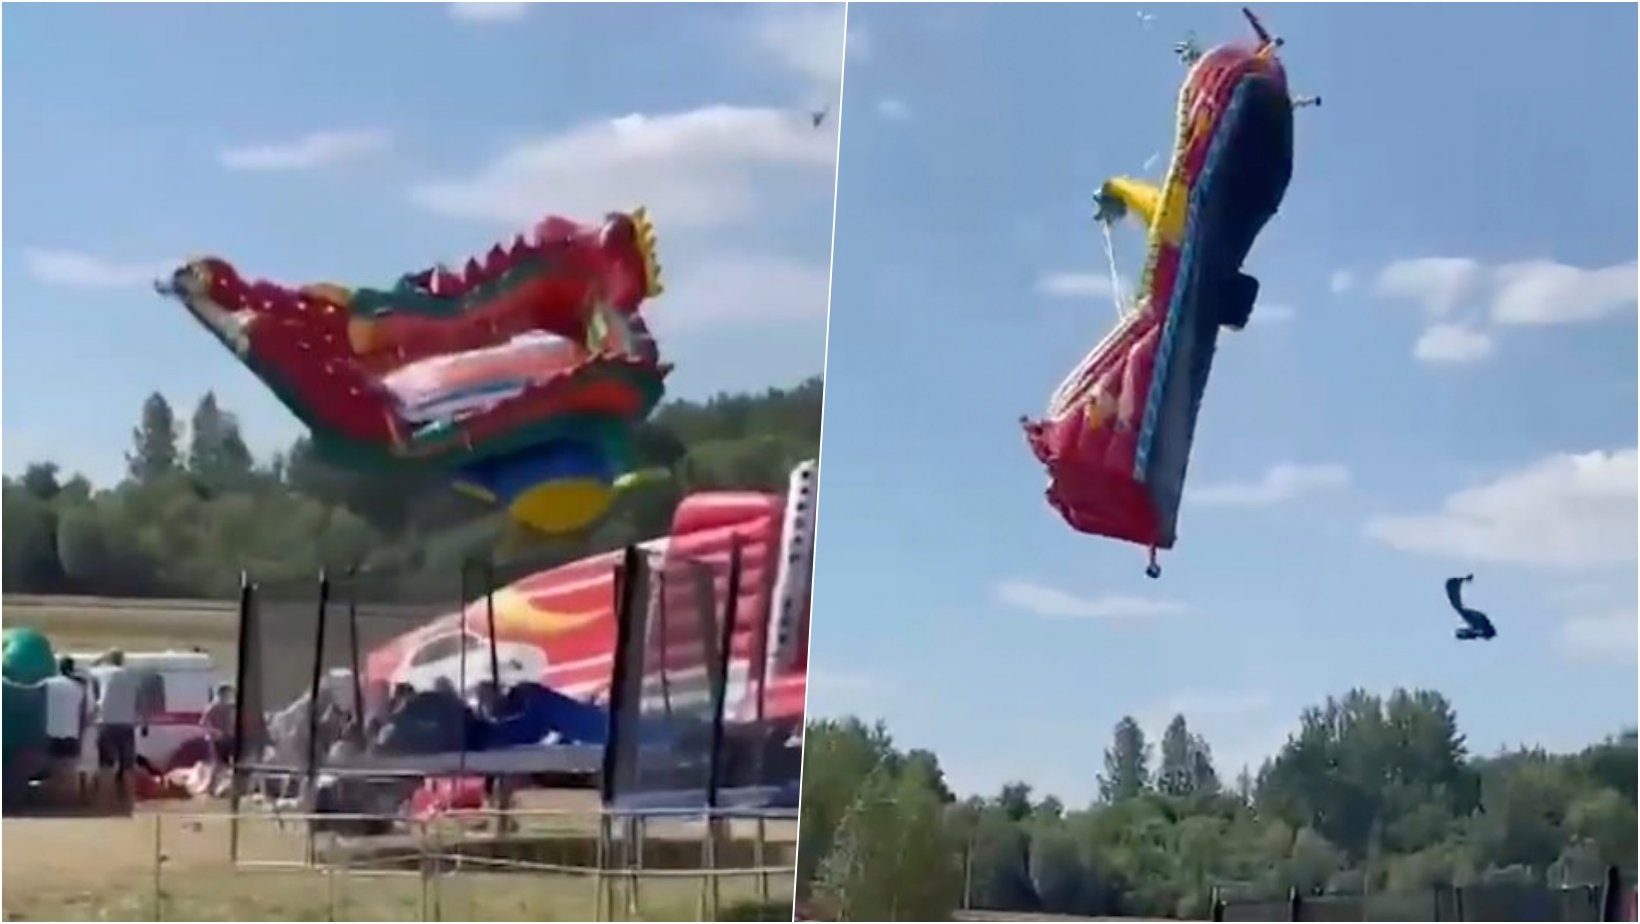 6 facebook cover 3.jpg?resize=1200,630 - Horrifying Incident When Strong Wind Blew Bouncy Castles Off, Tossing Children Into The Air 